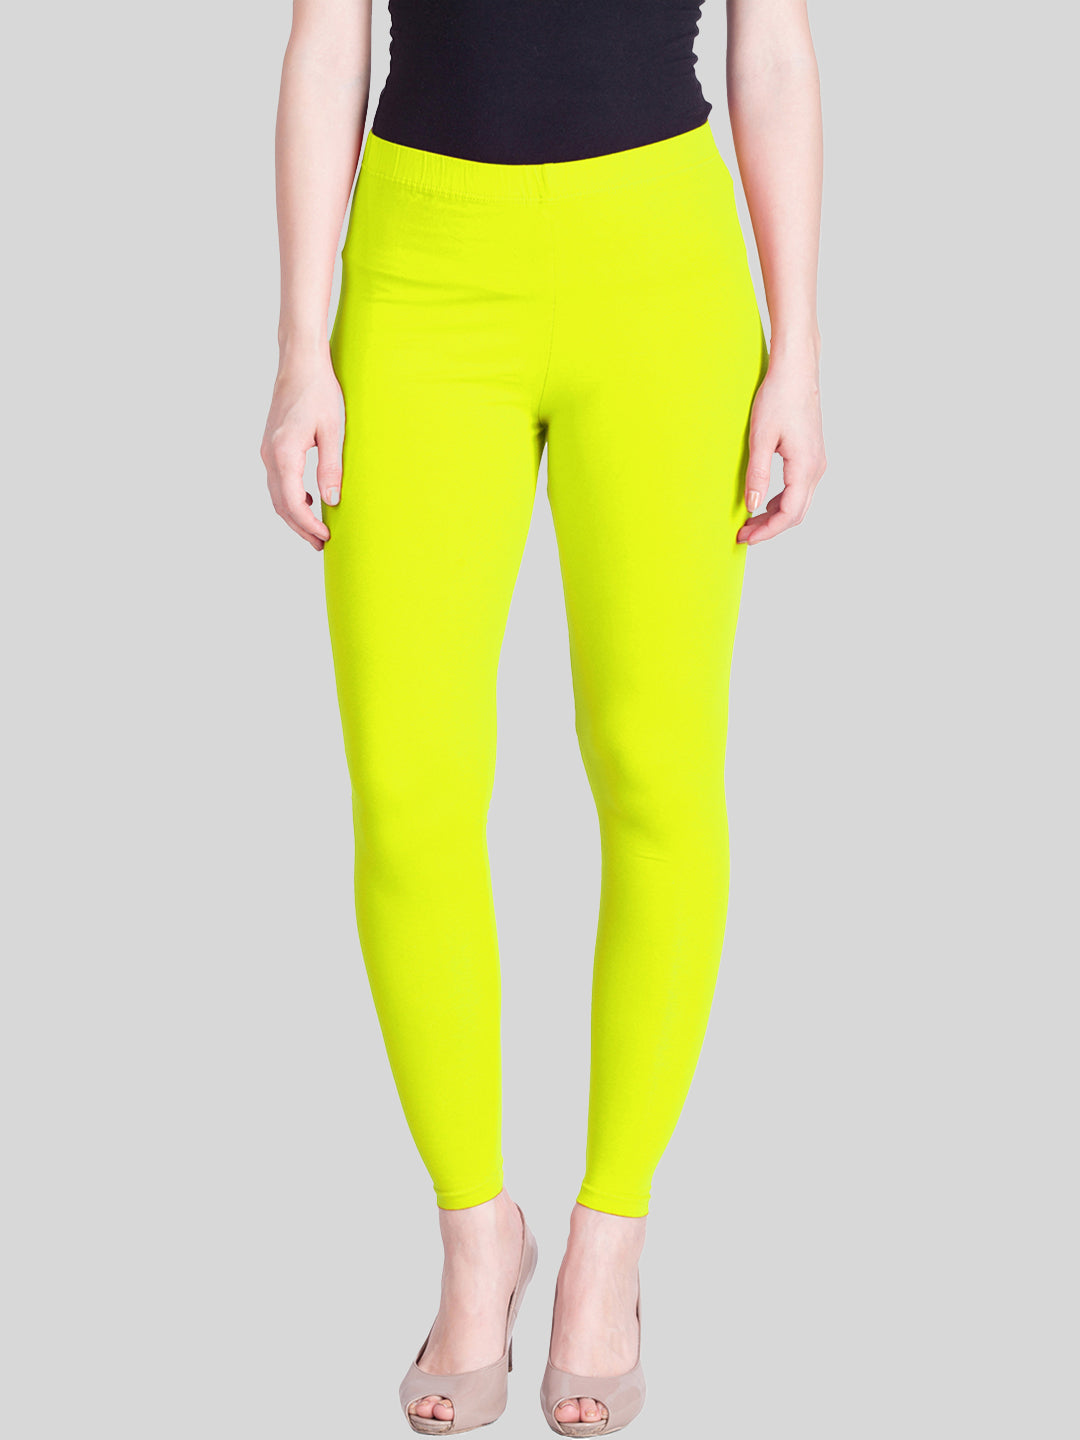 Buy Ankle Length Lyra Leggings online from Posh Urban An Exclusive